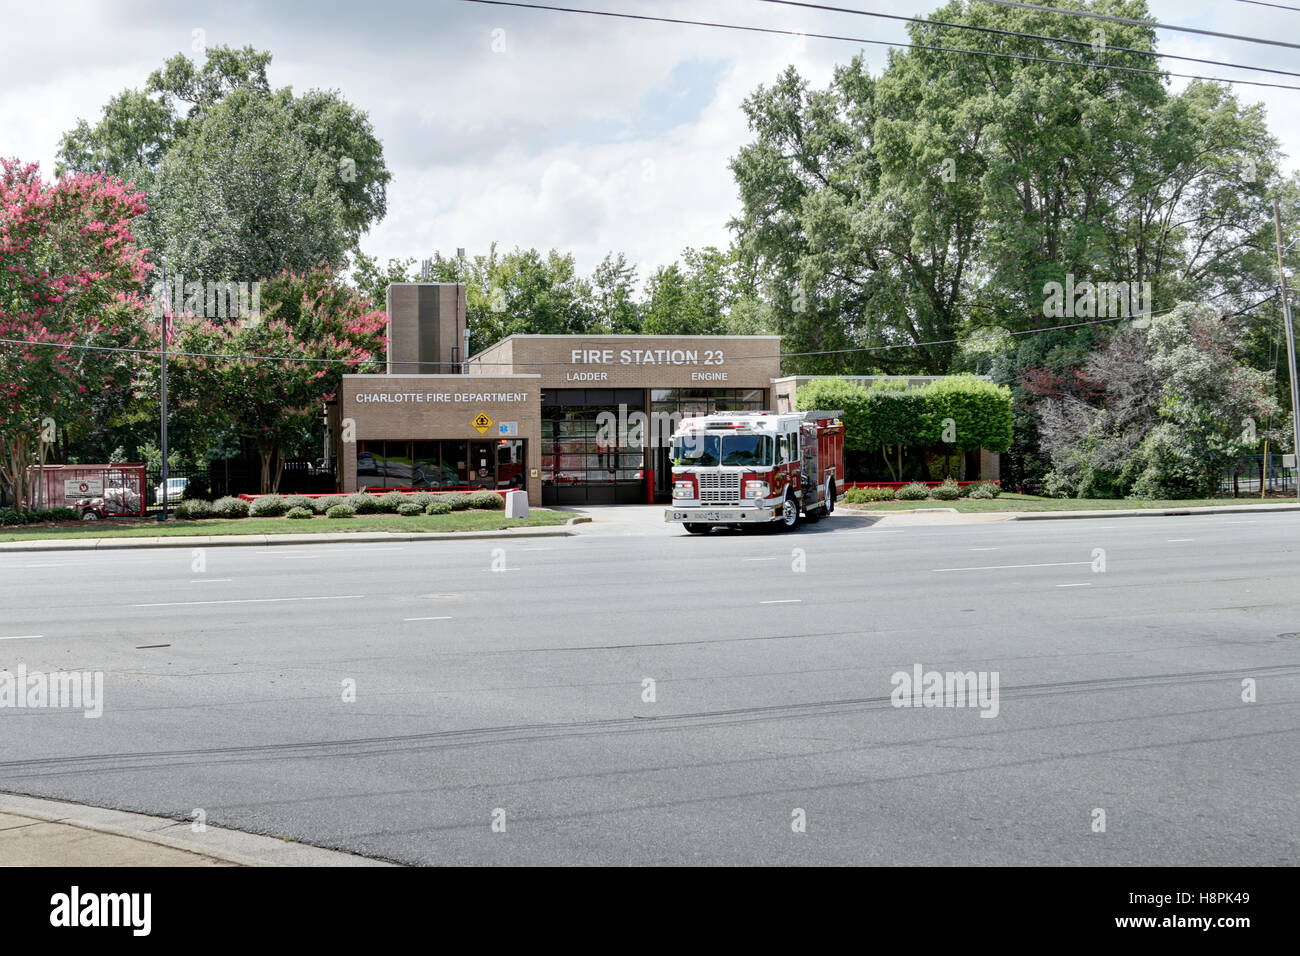 Charlotte CFD Fire Station 23 Stock Photo